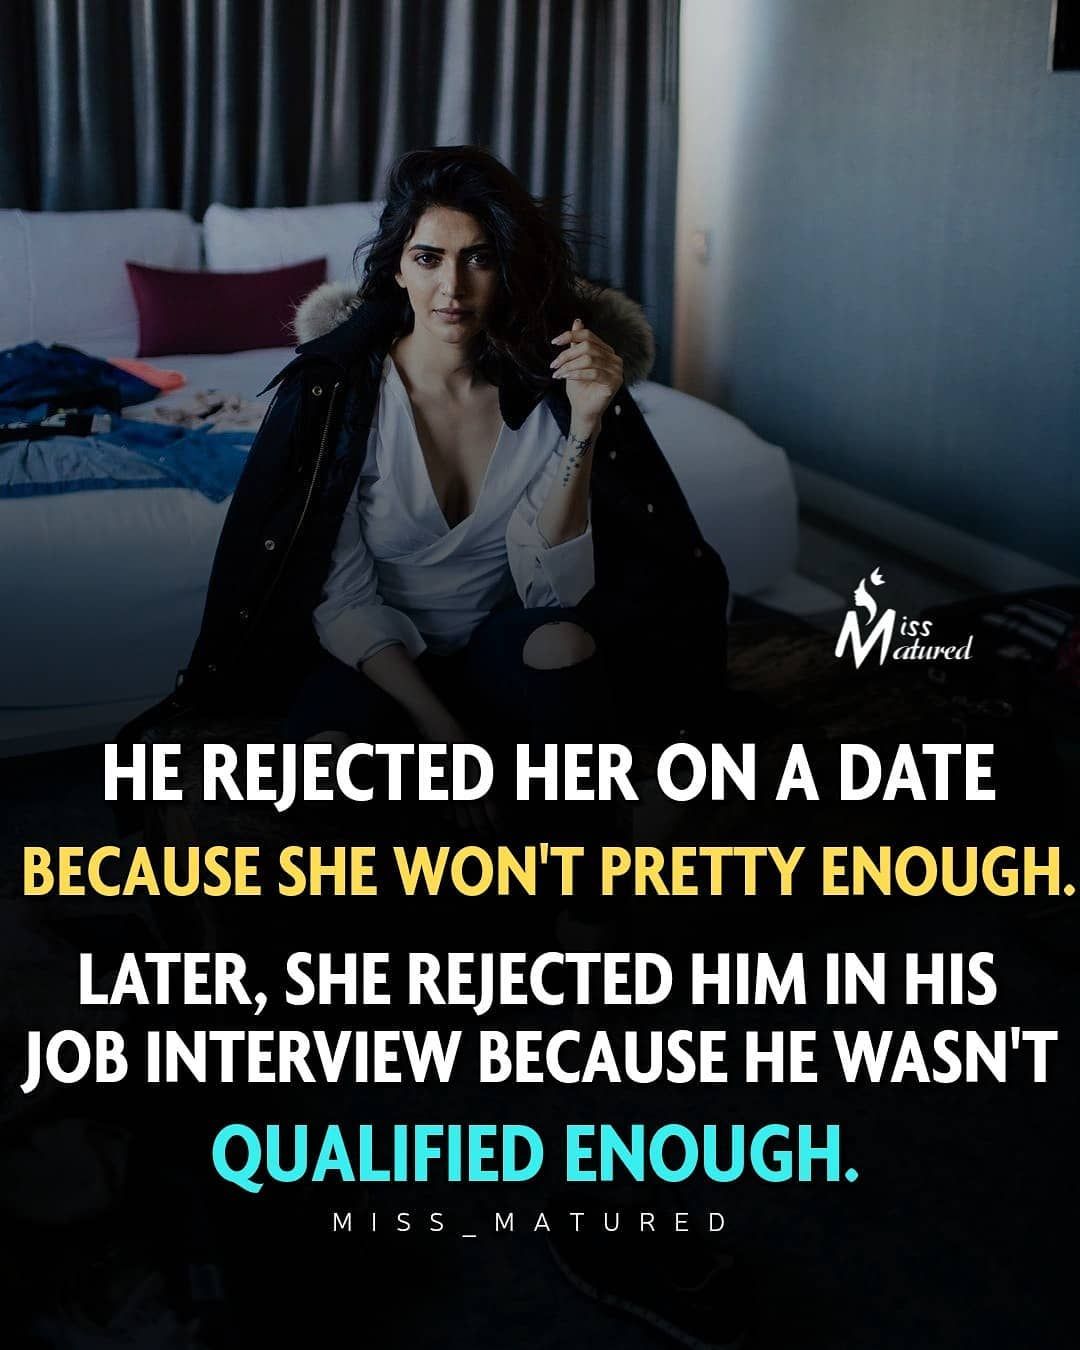 Attitude Revenge Quotes He Rejected Her On Date